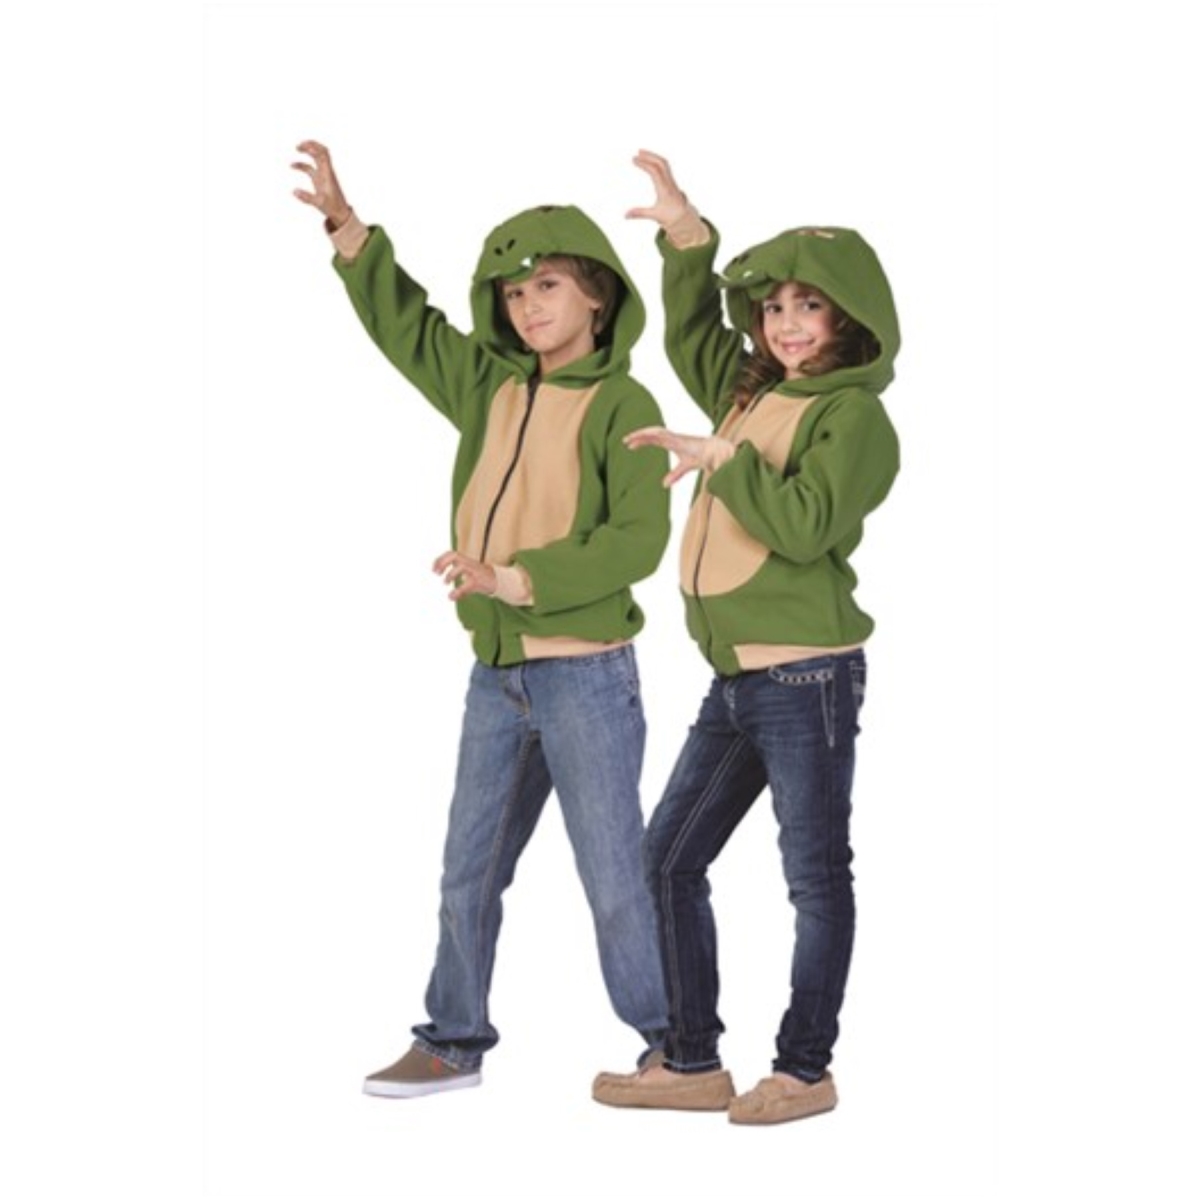 40508-l Child Ness The Dinosaur Hoodie Costume - Olive Green, Large